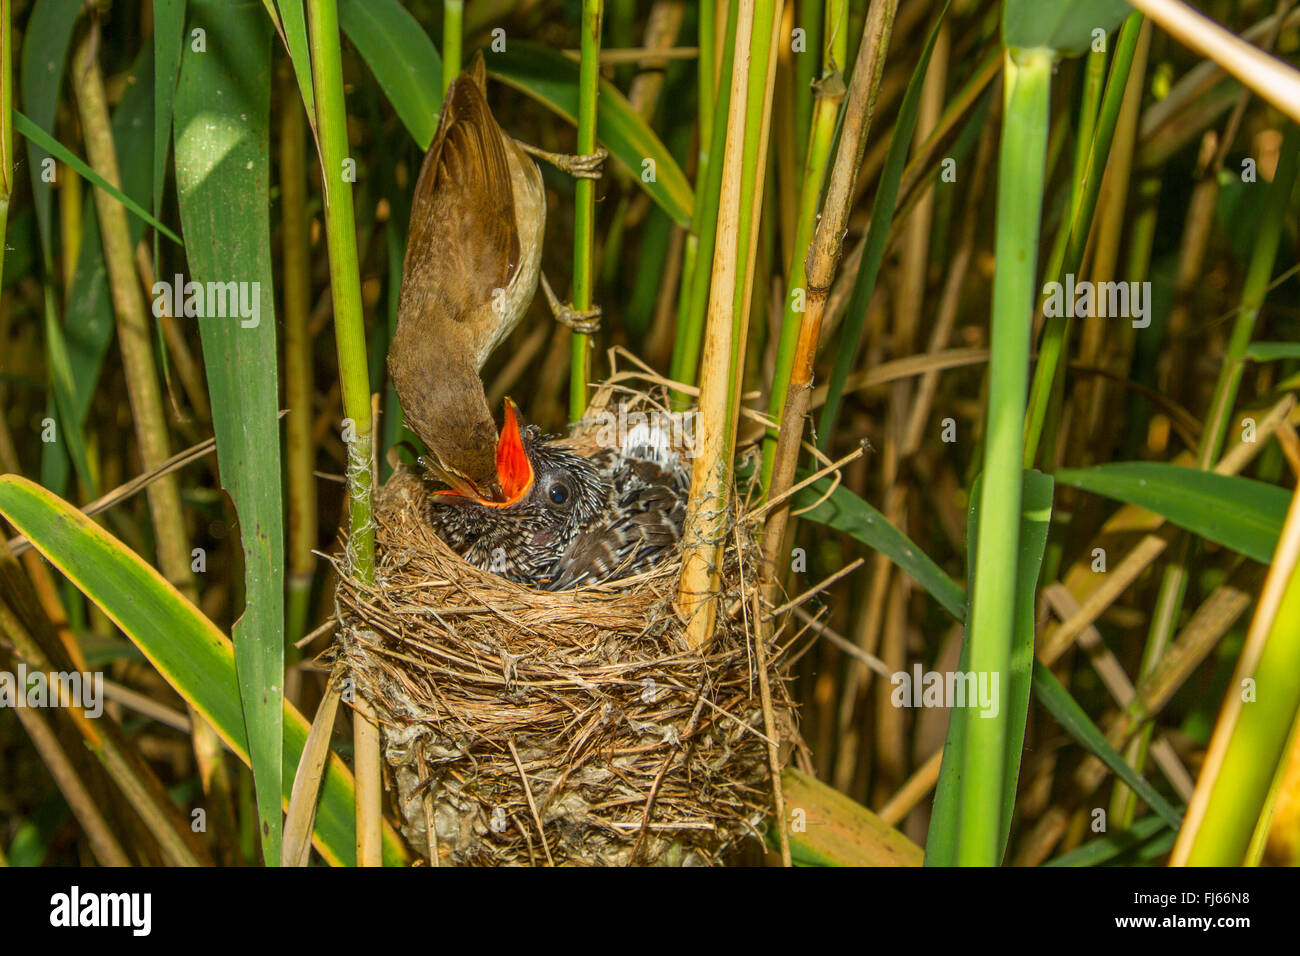 reed warbler (Acrocephalus scirpaceus), reed warbler feeding a seven days old young cuckoo in the nest, Germany, Bavaria, Oberbayern, Upper Bavaria Stock Photo